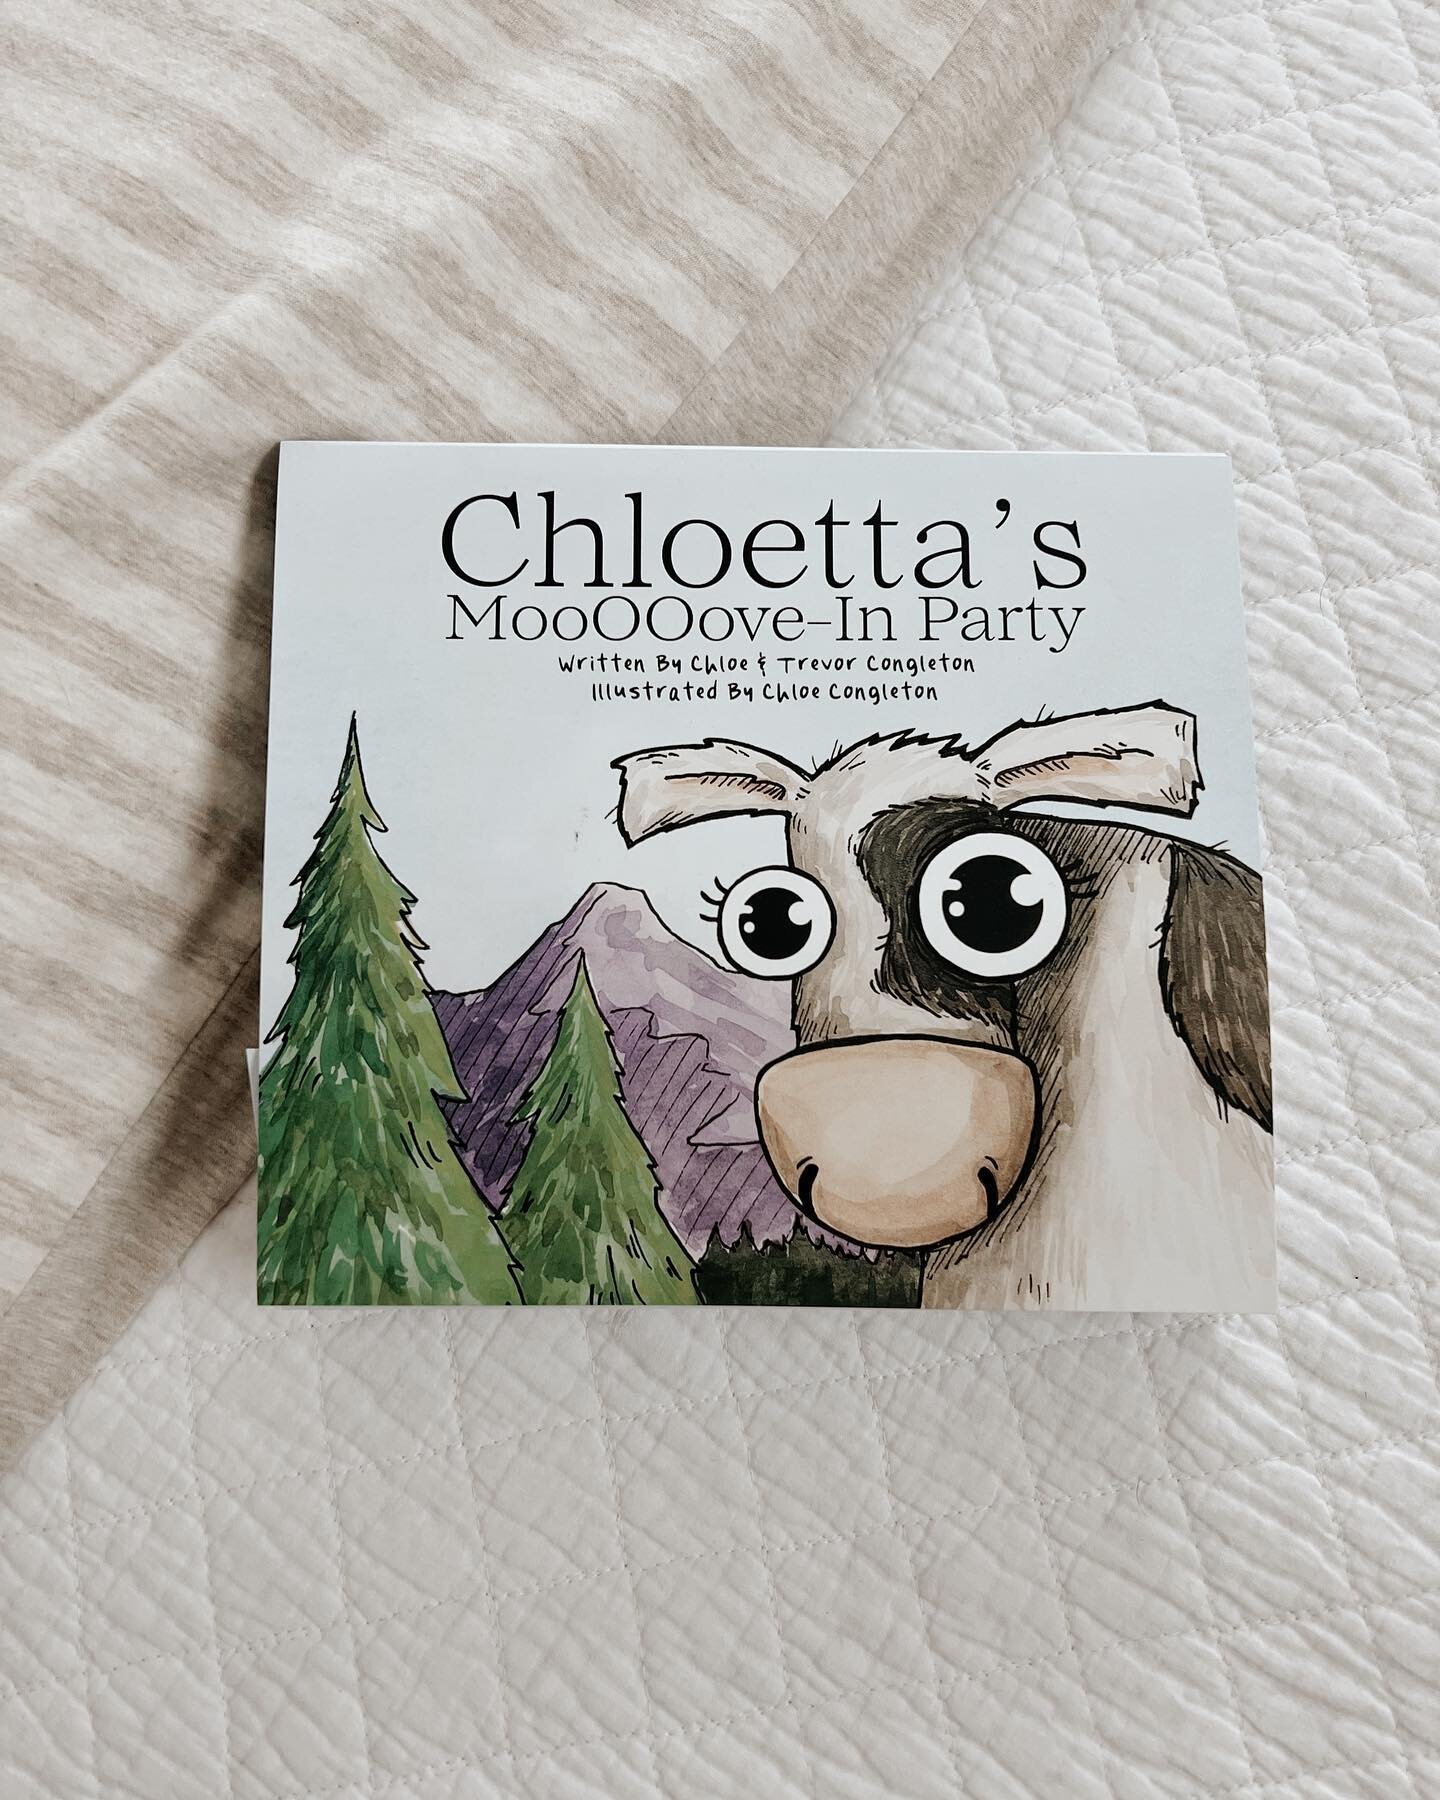 Local Author &amp; Illustrator children&rsquo;s book signing today at our wonderful downtown Walla Walla Book and Game!!! Come buy a book and get it signed 11am-2pm! Hope to see you there!!!
.
#chloetta #chloettacow #moveinparty #childrensbooks #book